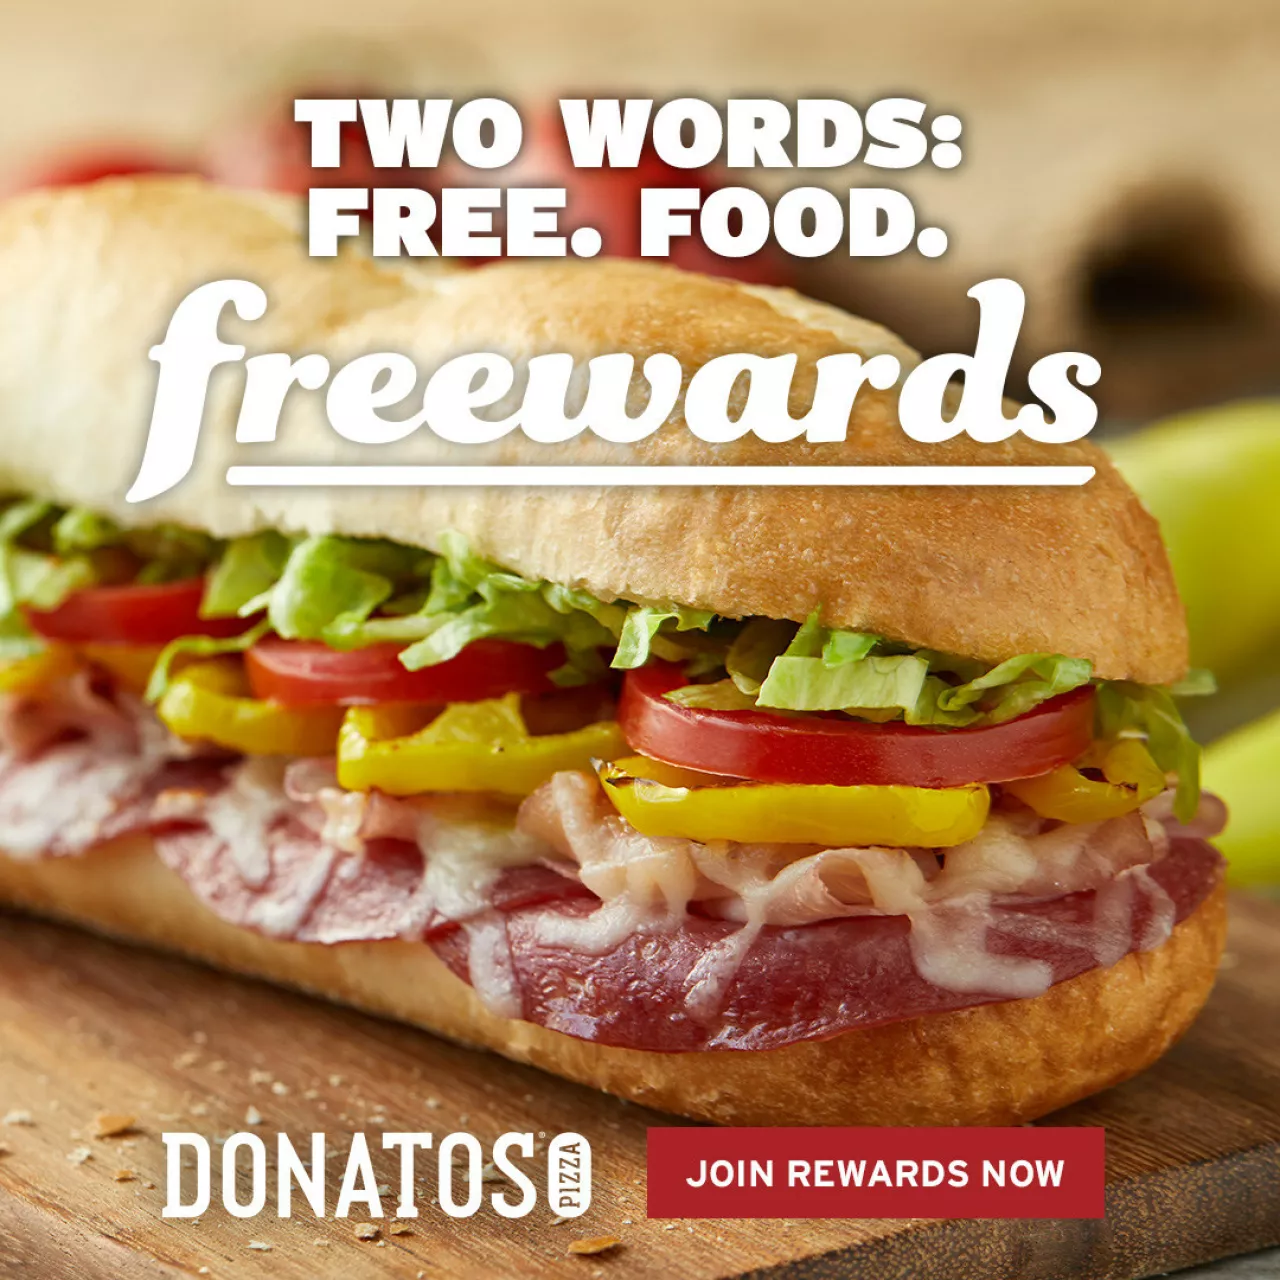 Freewards is coming to Donatos on May 1. Sign up at donatos.com/freewards to be eligible. img#1